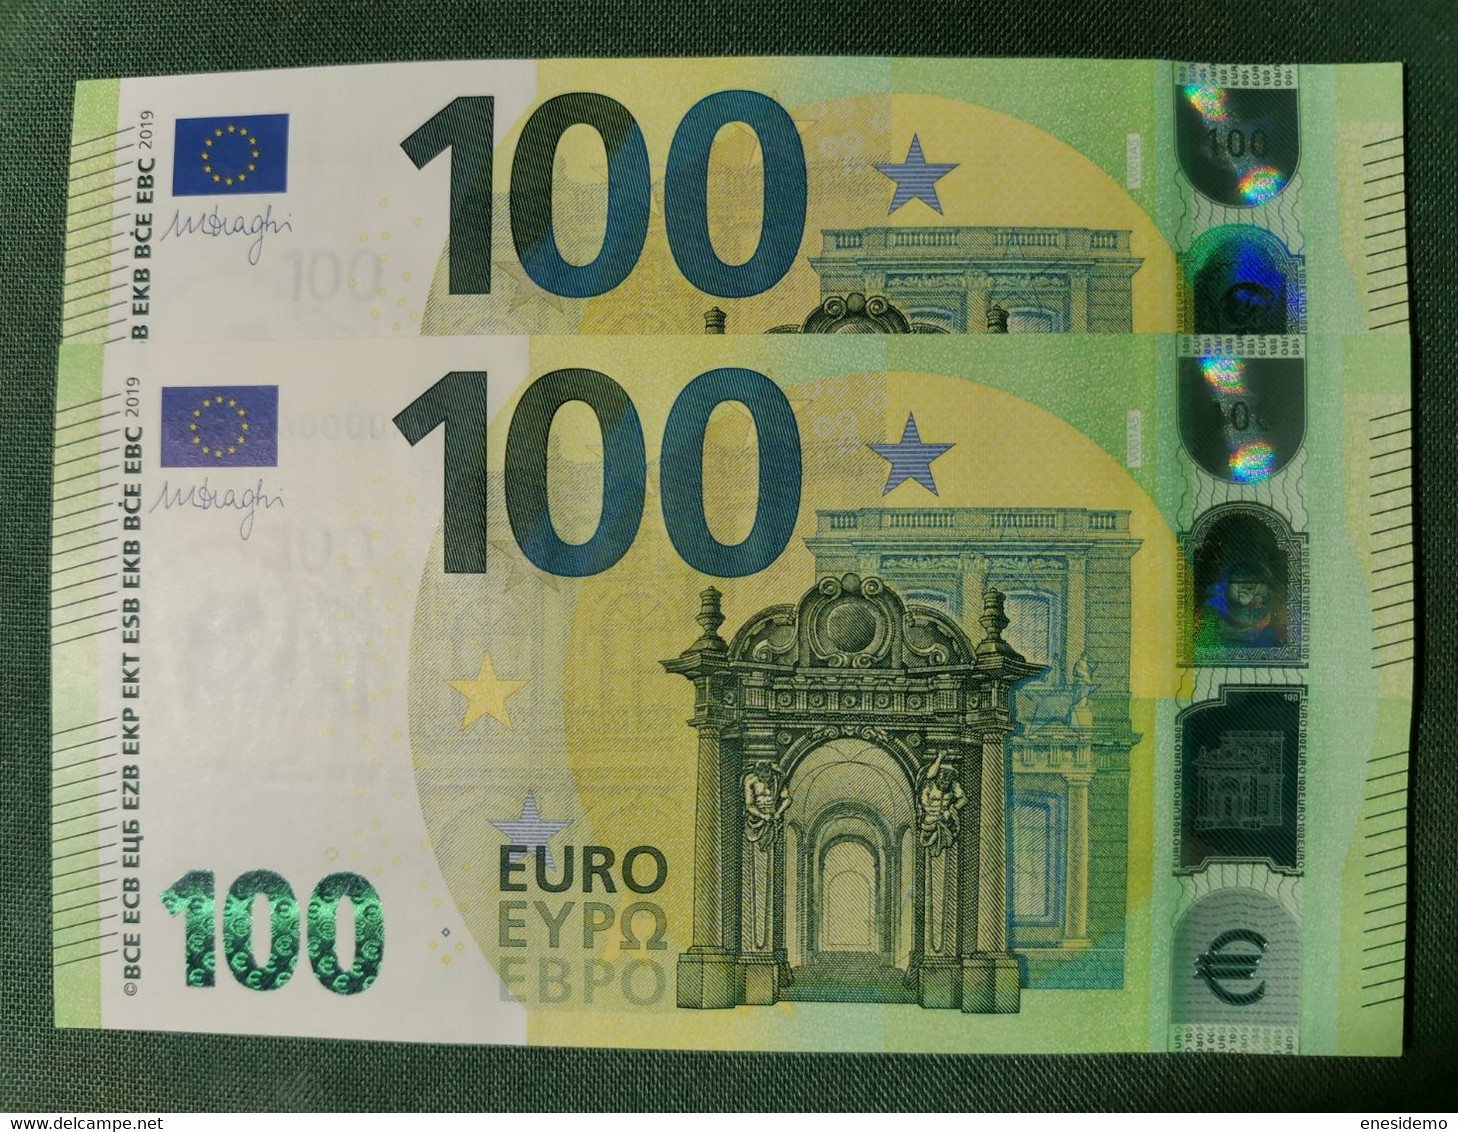 100 EURO SPAIN 2019 DRAGHI V001A5 VA0000 RARE VERY LOW SERIAL NUMBER CORRELATIVE COUPLE UNCIRCULATED PERFECT